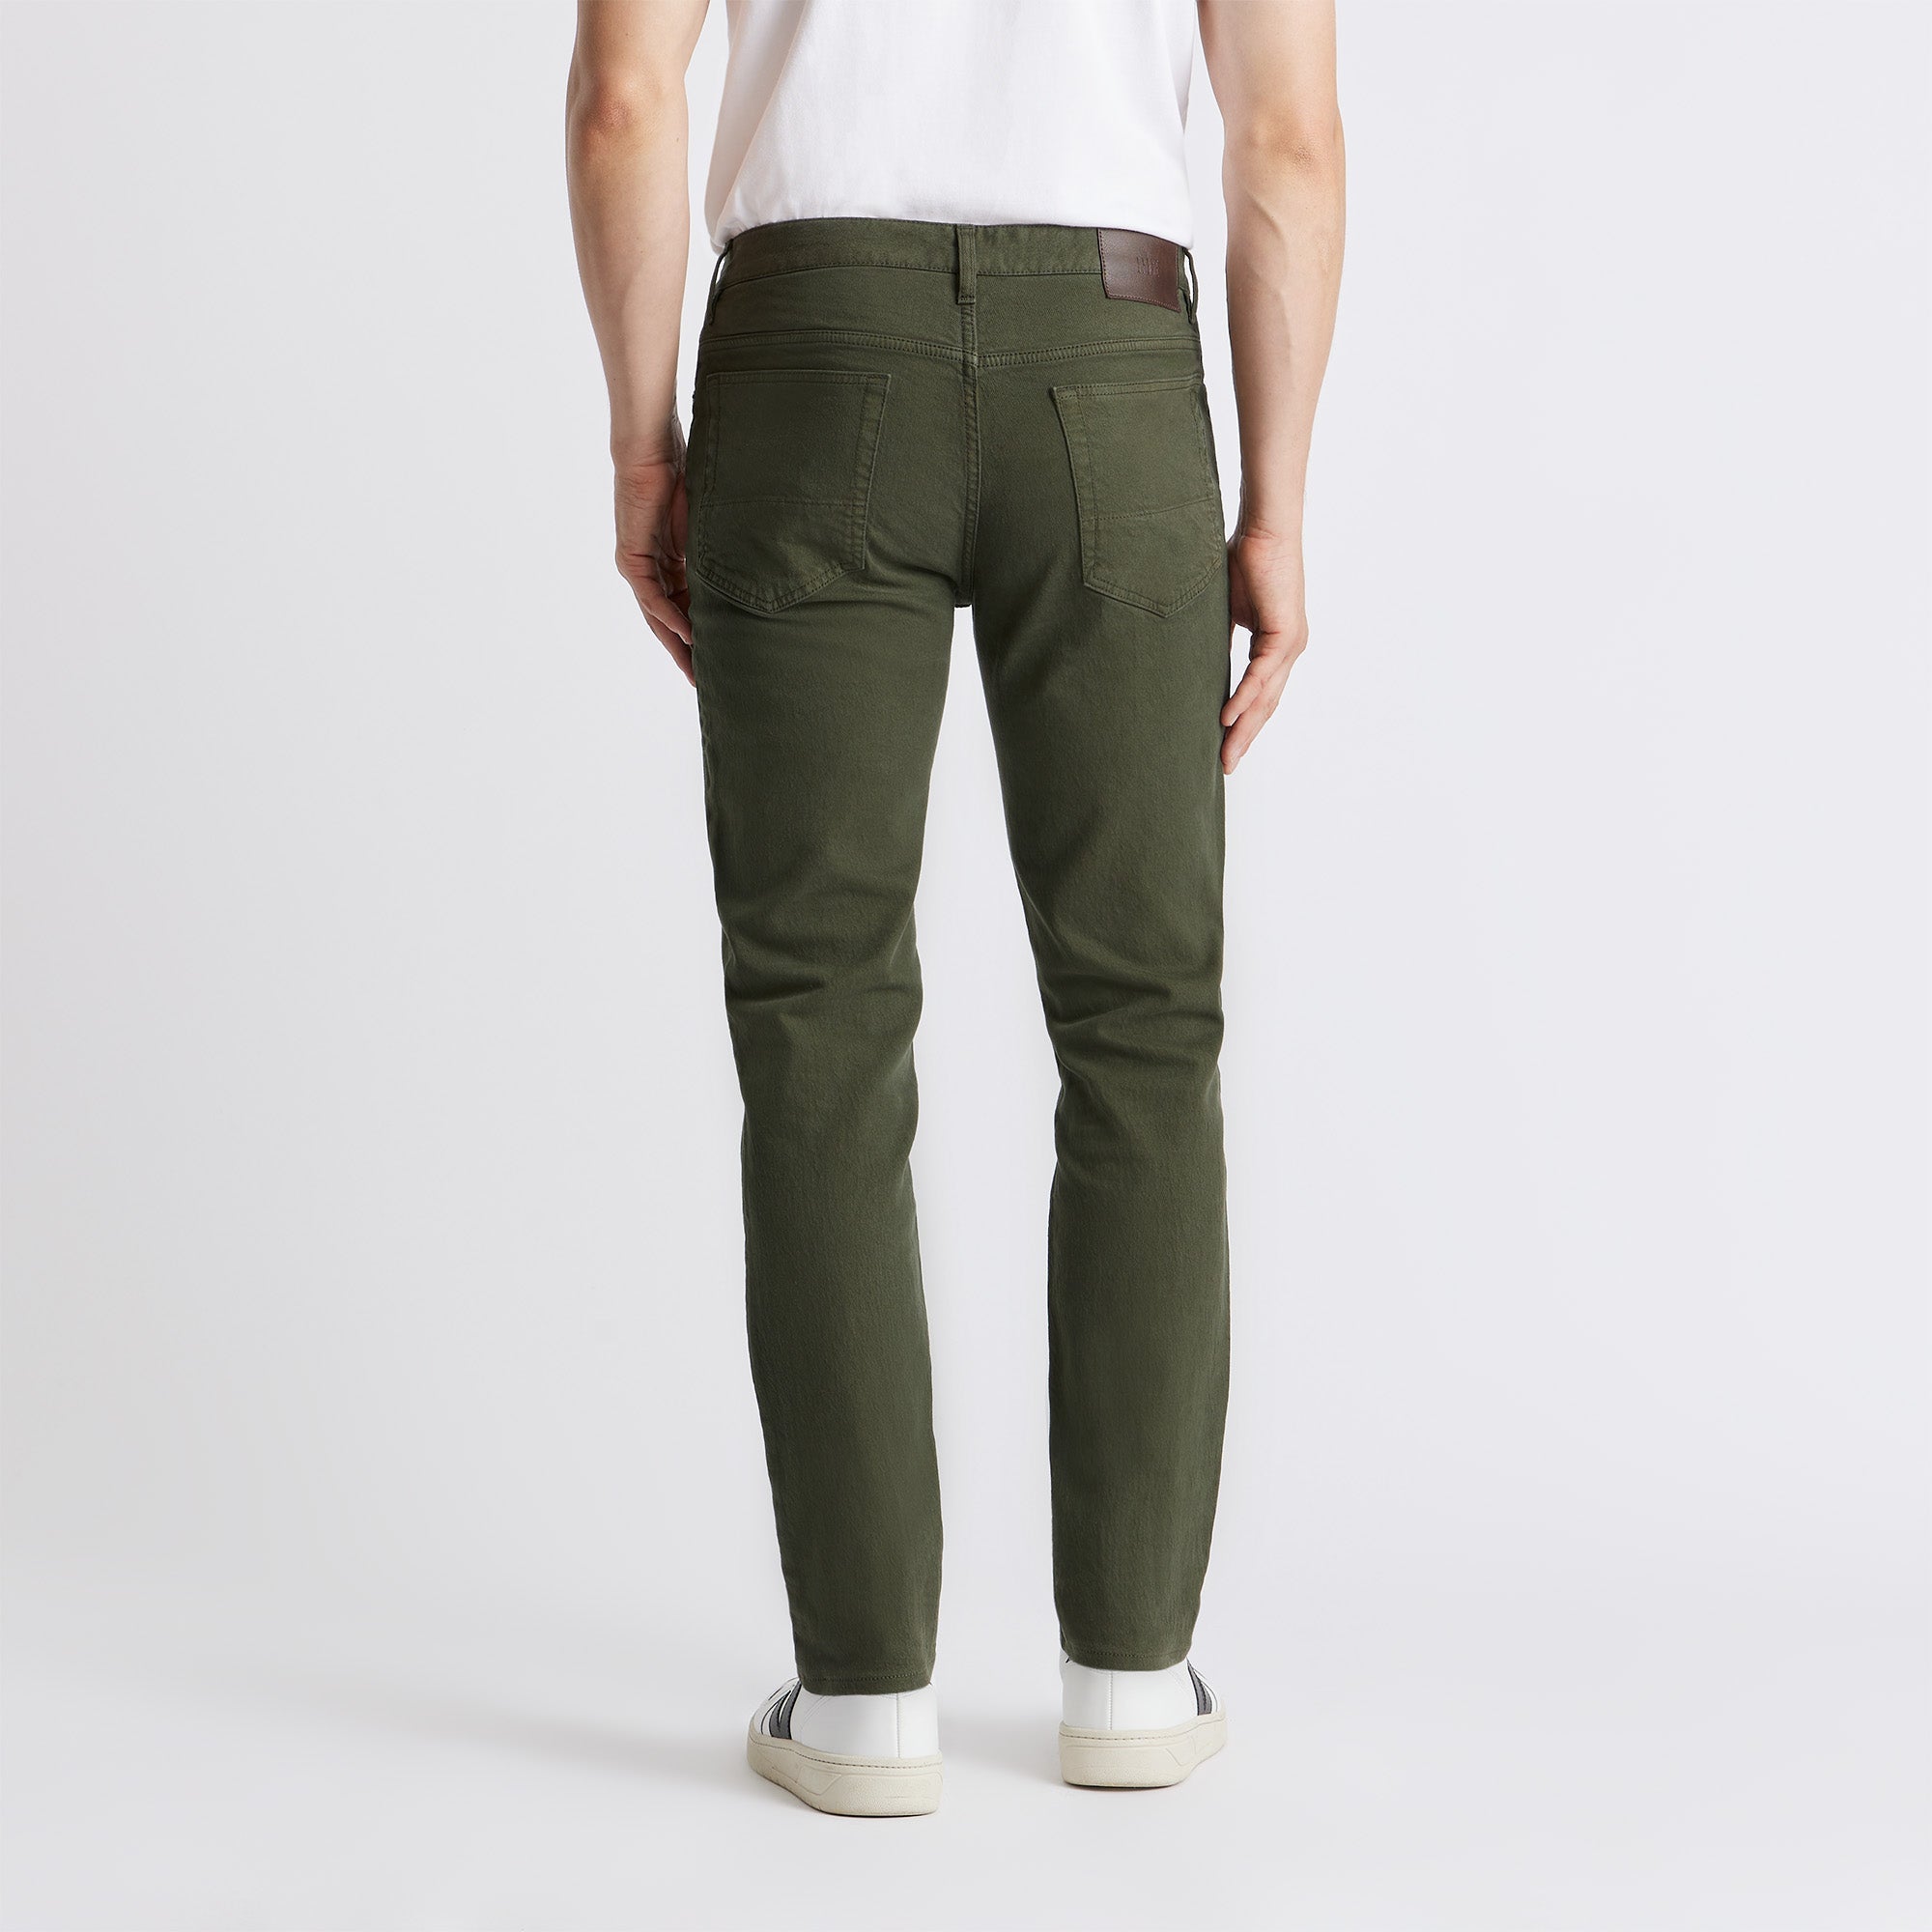 CONTRASTING DOUBLE WAIST CHINO PANTS - Mid-camel | ZARA United States